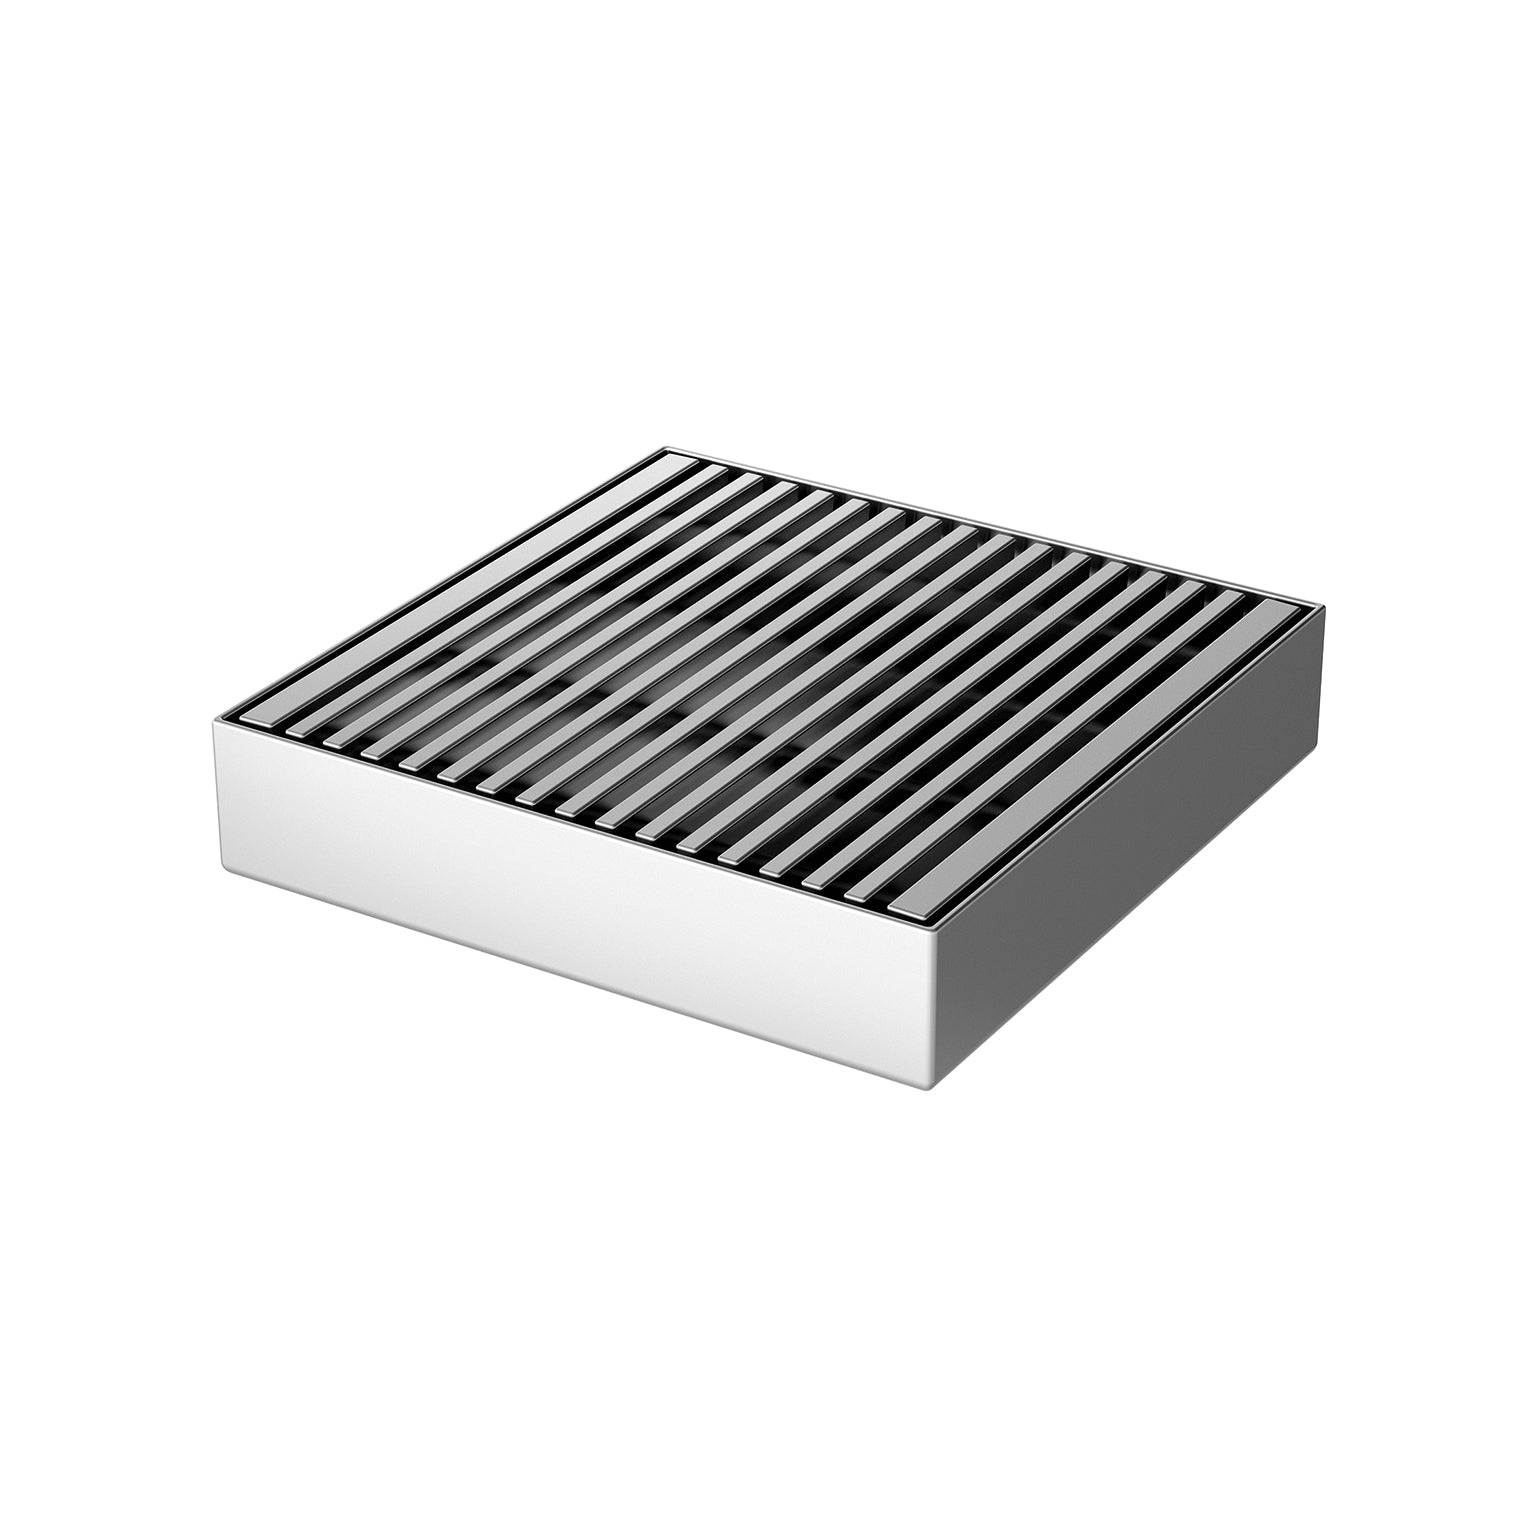 PHOENIX POINT DRAIN HG 130MM OUTLET STAINLESS STEEL 90MM